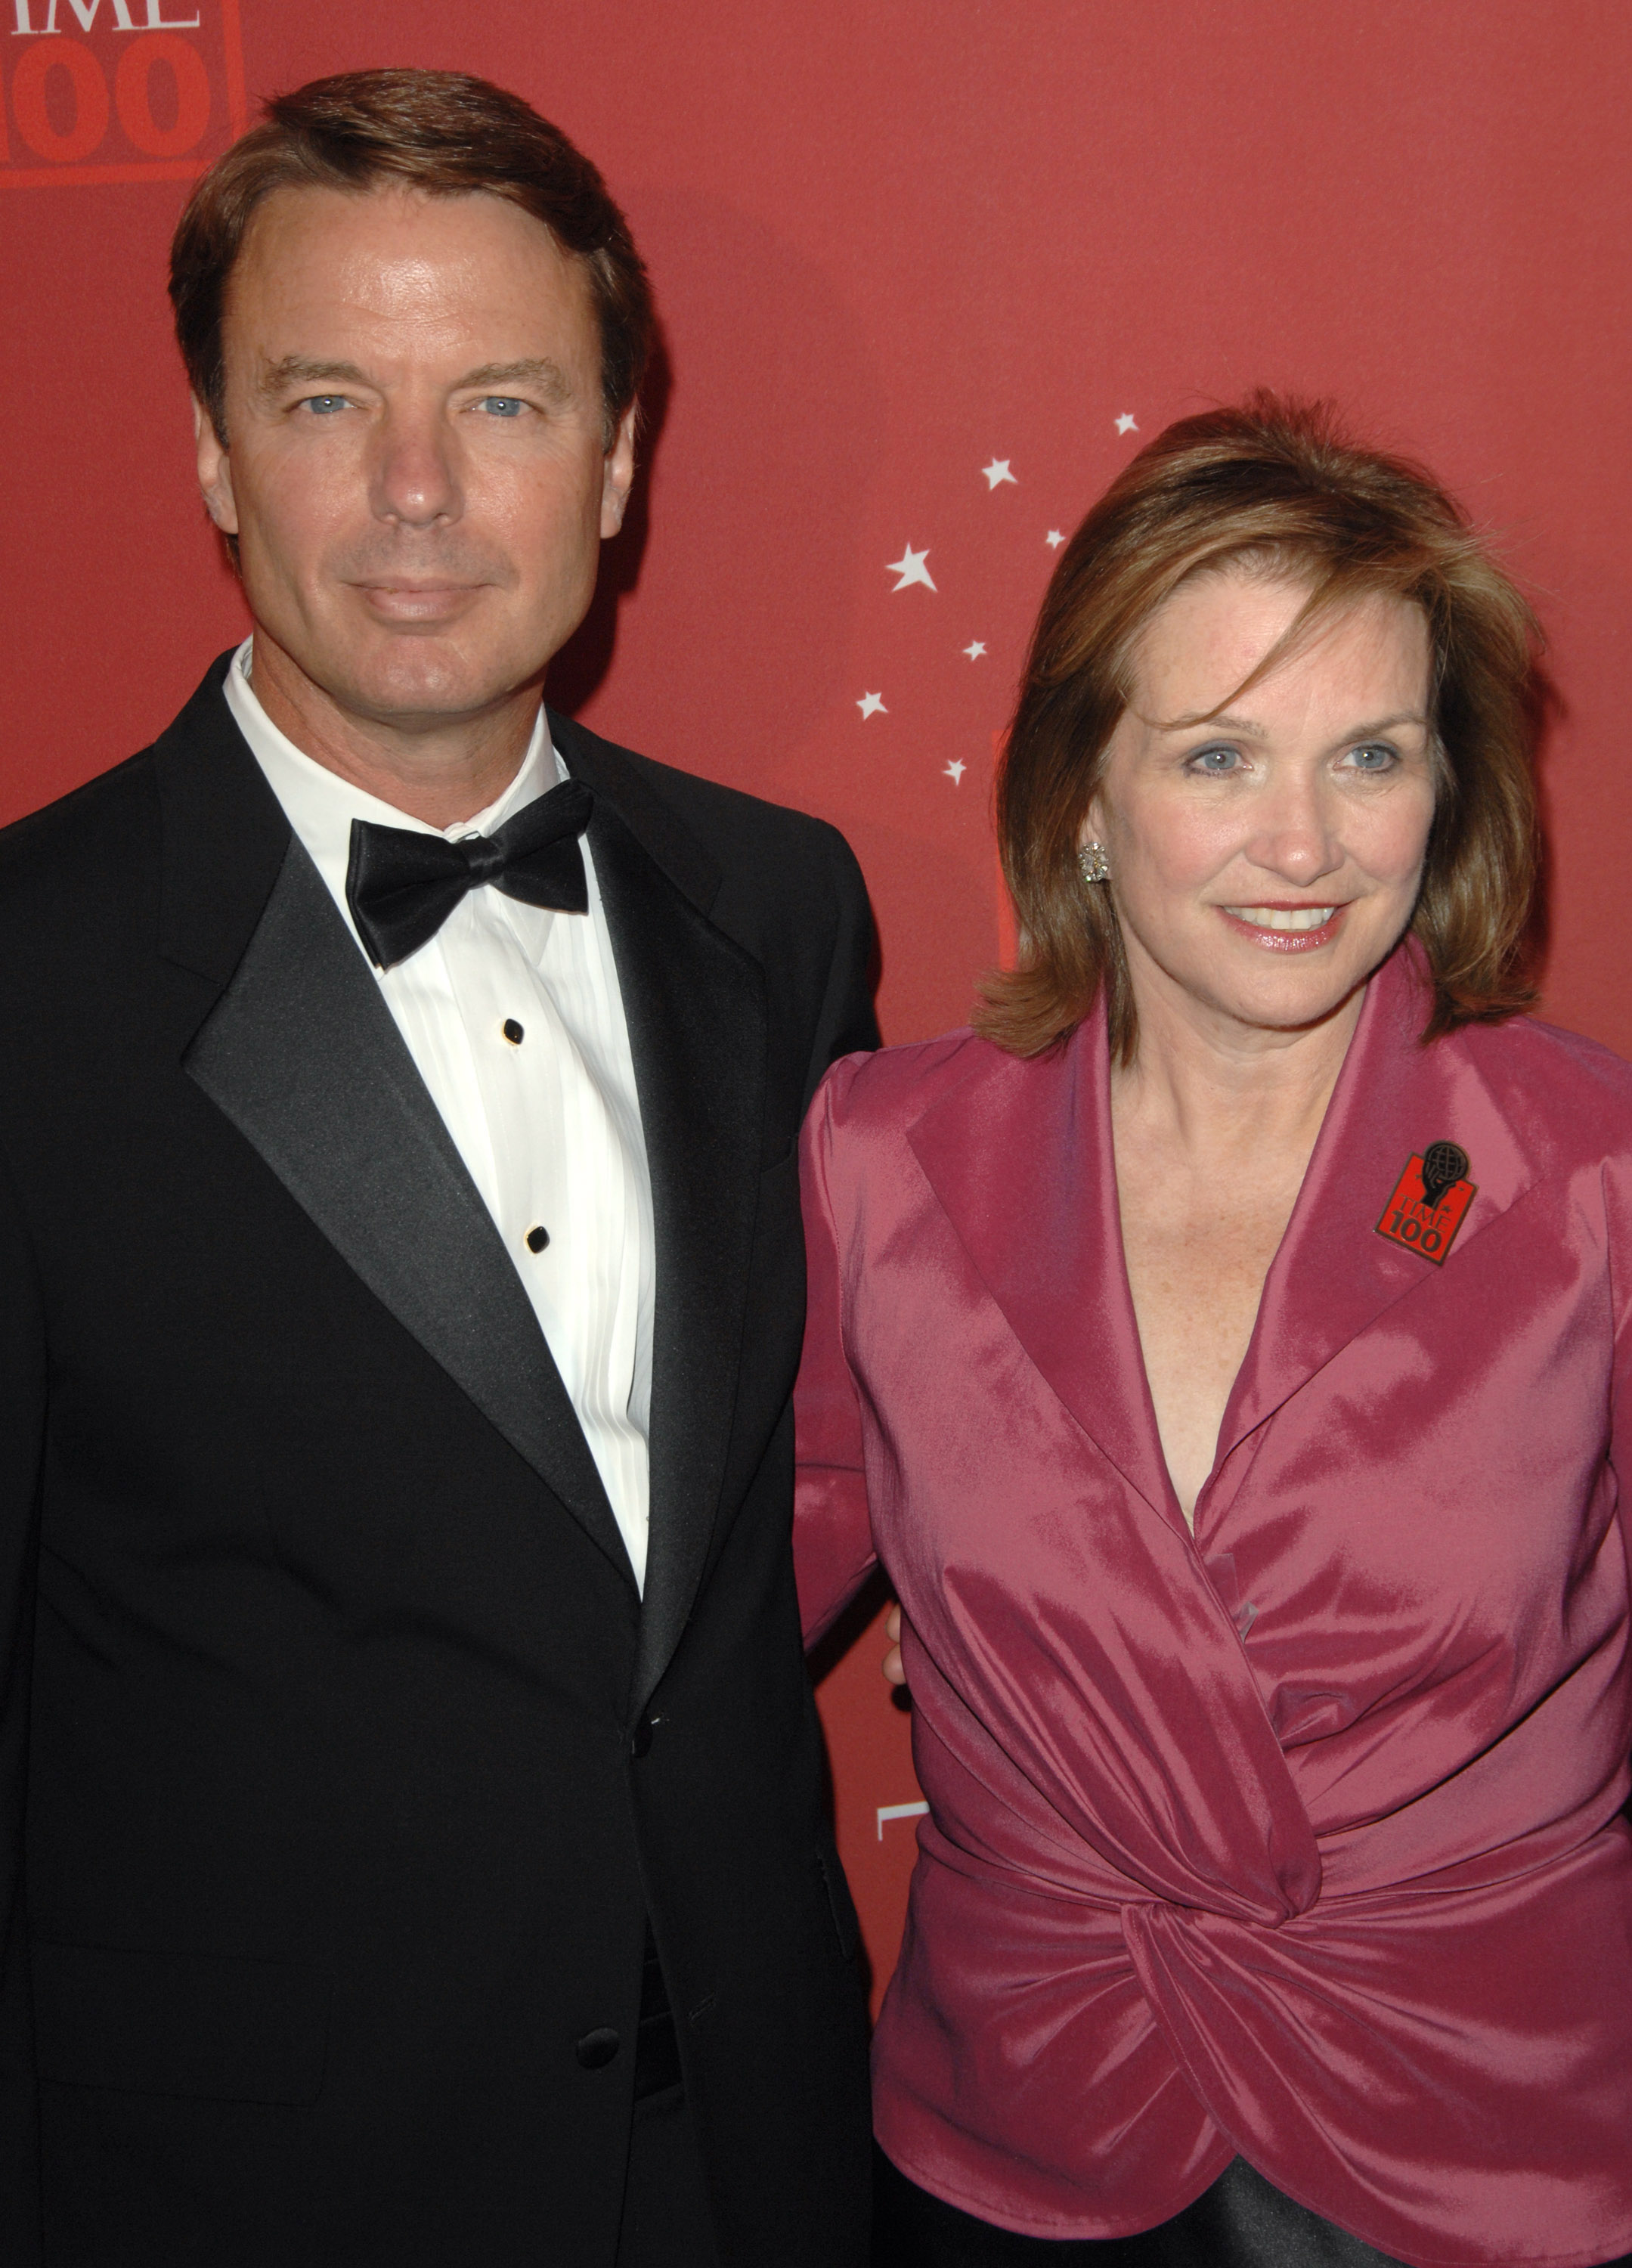 <p>John Edwards was hot on the presidential campaign trail when he started up an affair with Rielle Hunter in 2006 despite being married to Elizabeth Edwards, who was suffering from cancer. Two years later, news broke revealing the ongoing infidelity, which John initially tried to deny -- along with the existence of their illegitimate child. John and Elizabeth finally split, and she died from cancer in late 2010. Although rumors started flying that John planned to marry Rielle, instead, their relationship came to an end.</p>